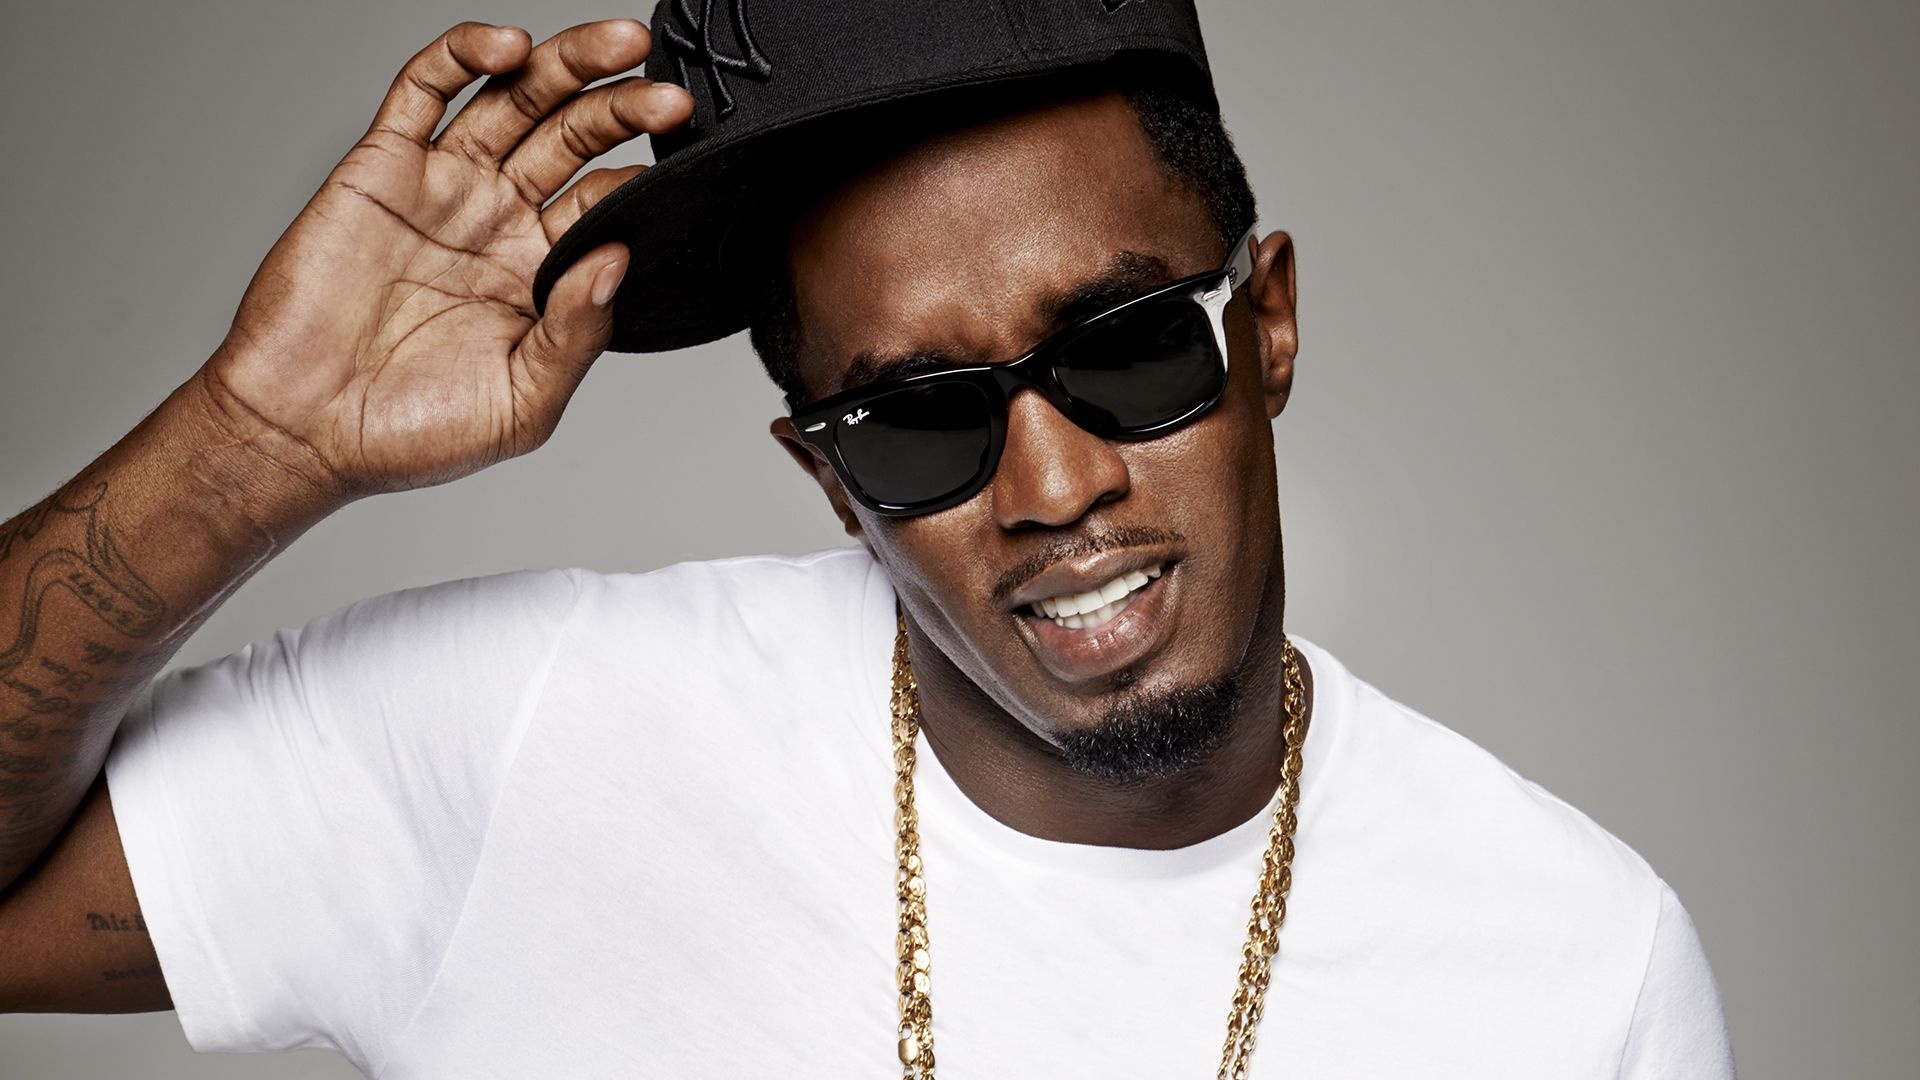 Sean Combs, Top celeb backgrounds, Diddy wallpapers, Free backgrounds, 1920x1080 Full HD Desktop